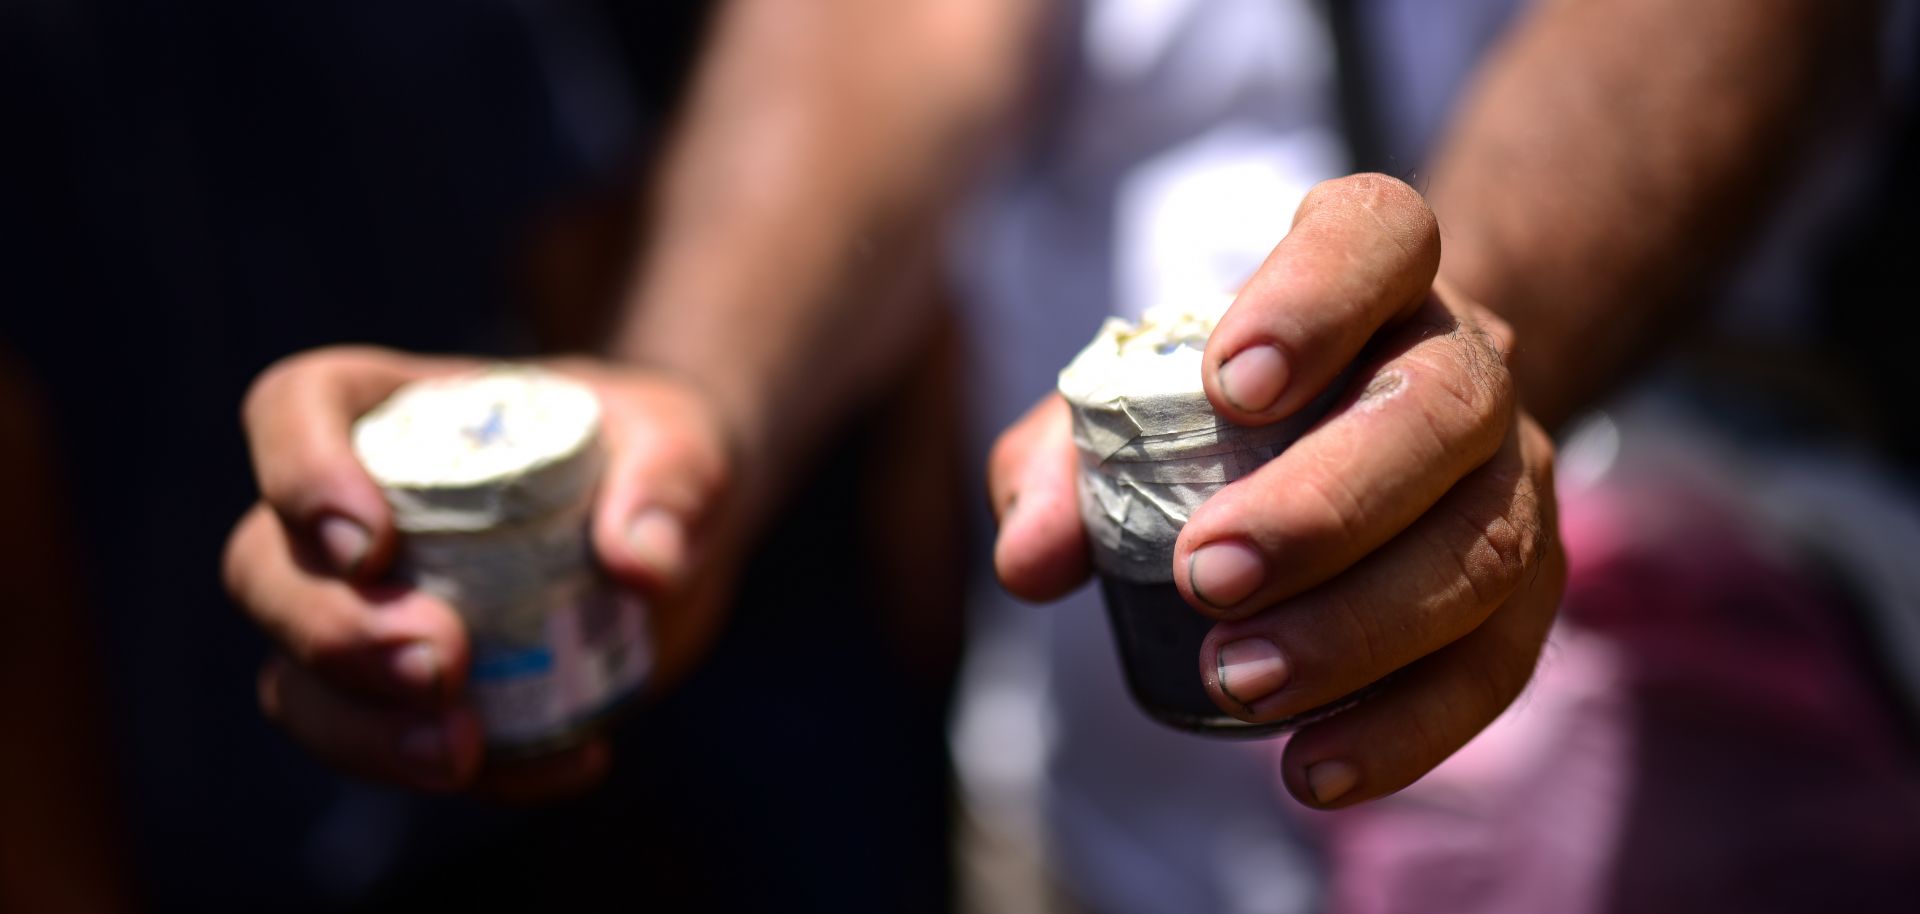 A protestor in Nicaragua shows off two homemade bombs.